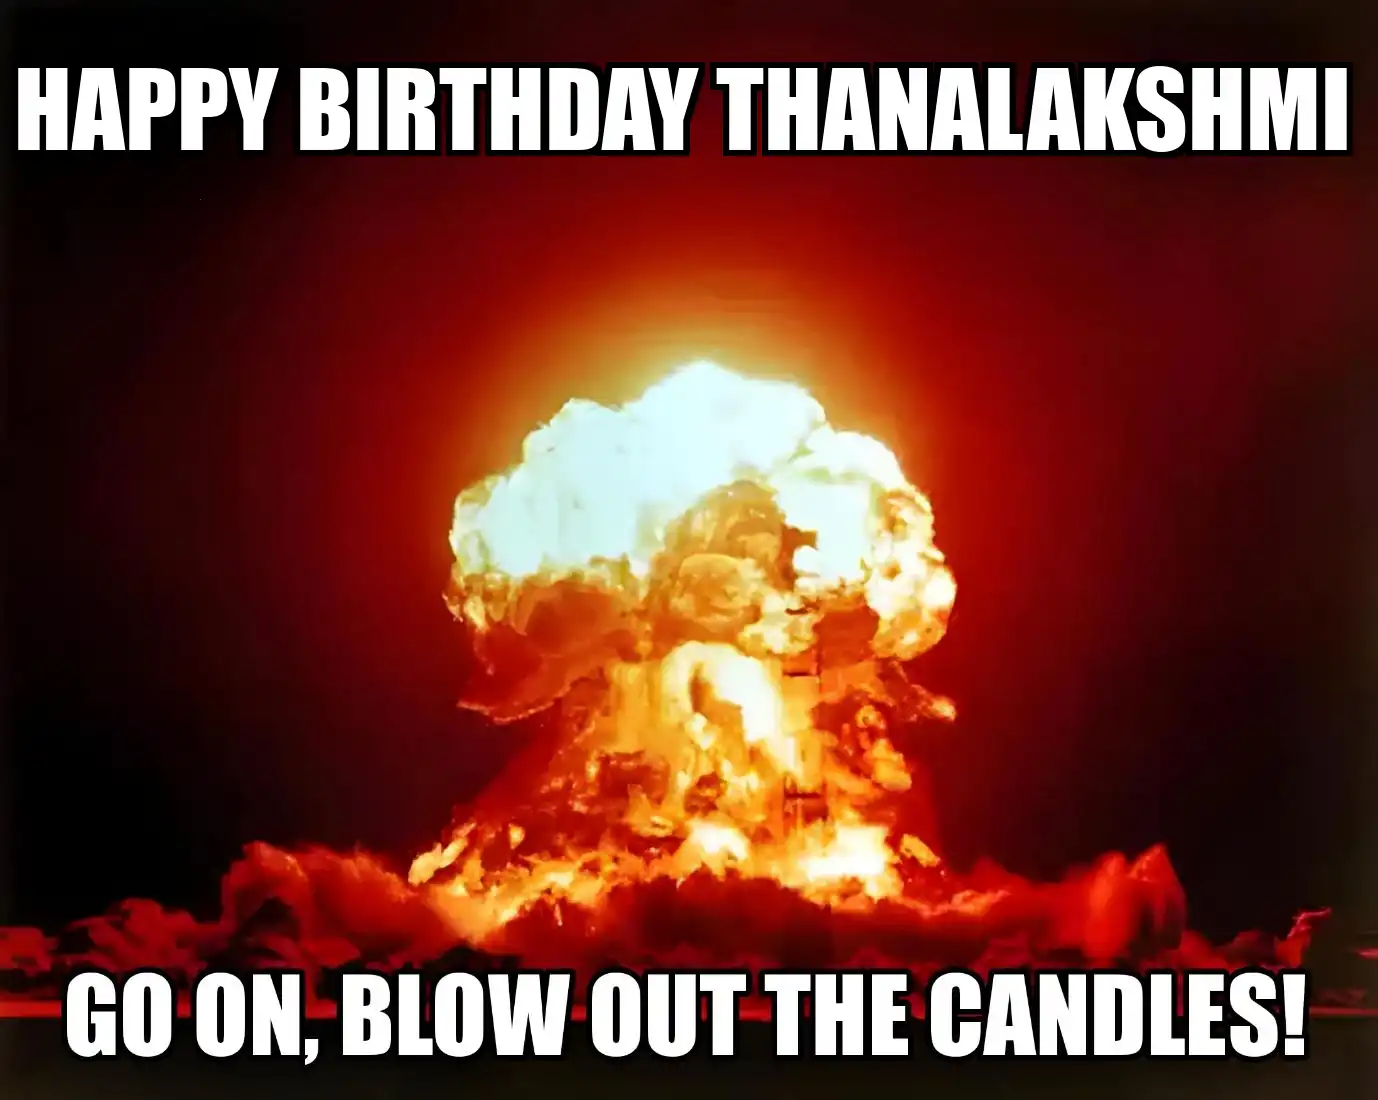 Happy Birthday Thanalakshmi Go On Blow Out The Candles Meme